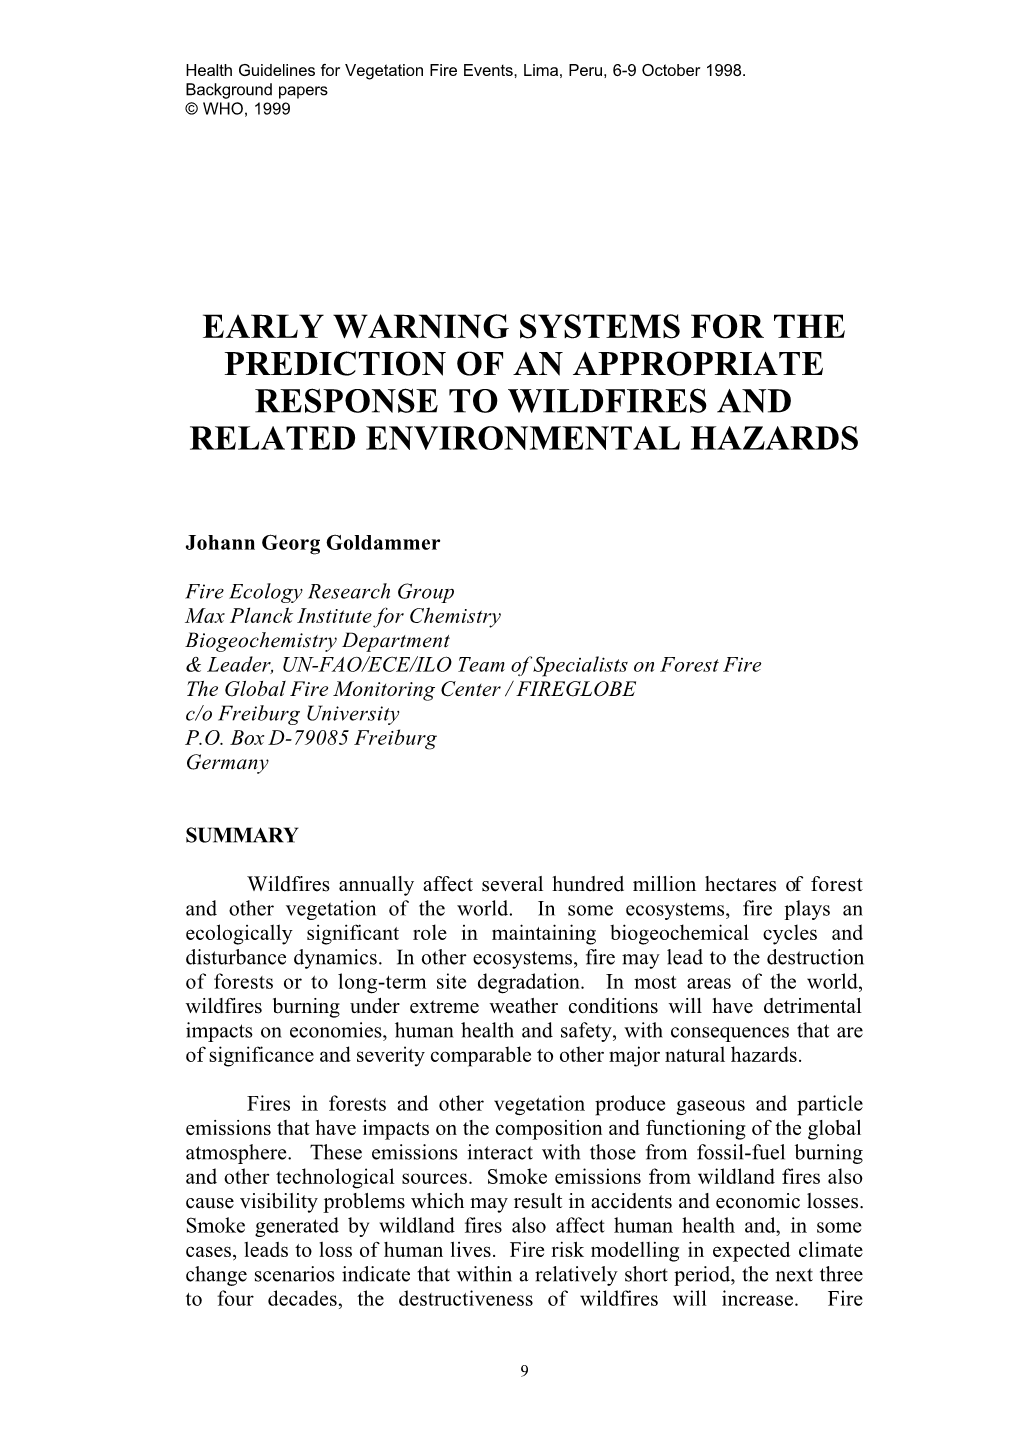 Early Warning Systems for the Prediction of an Appropriate Response to Wildfires and Related Environmental Hazards